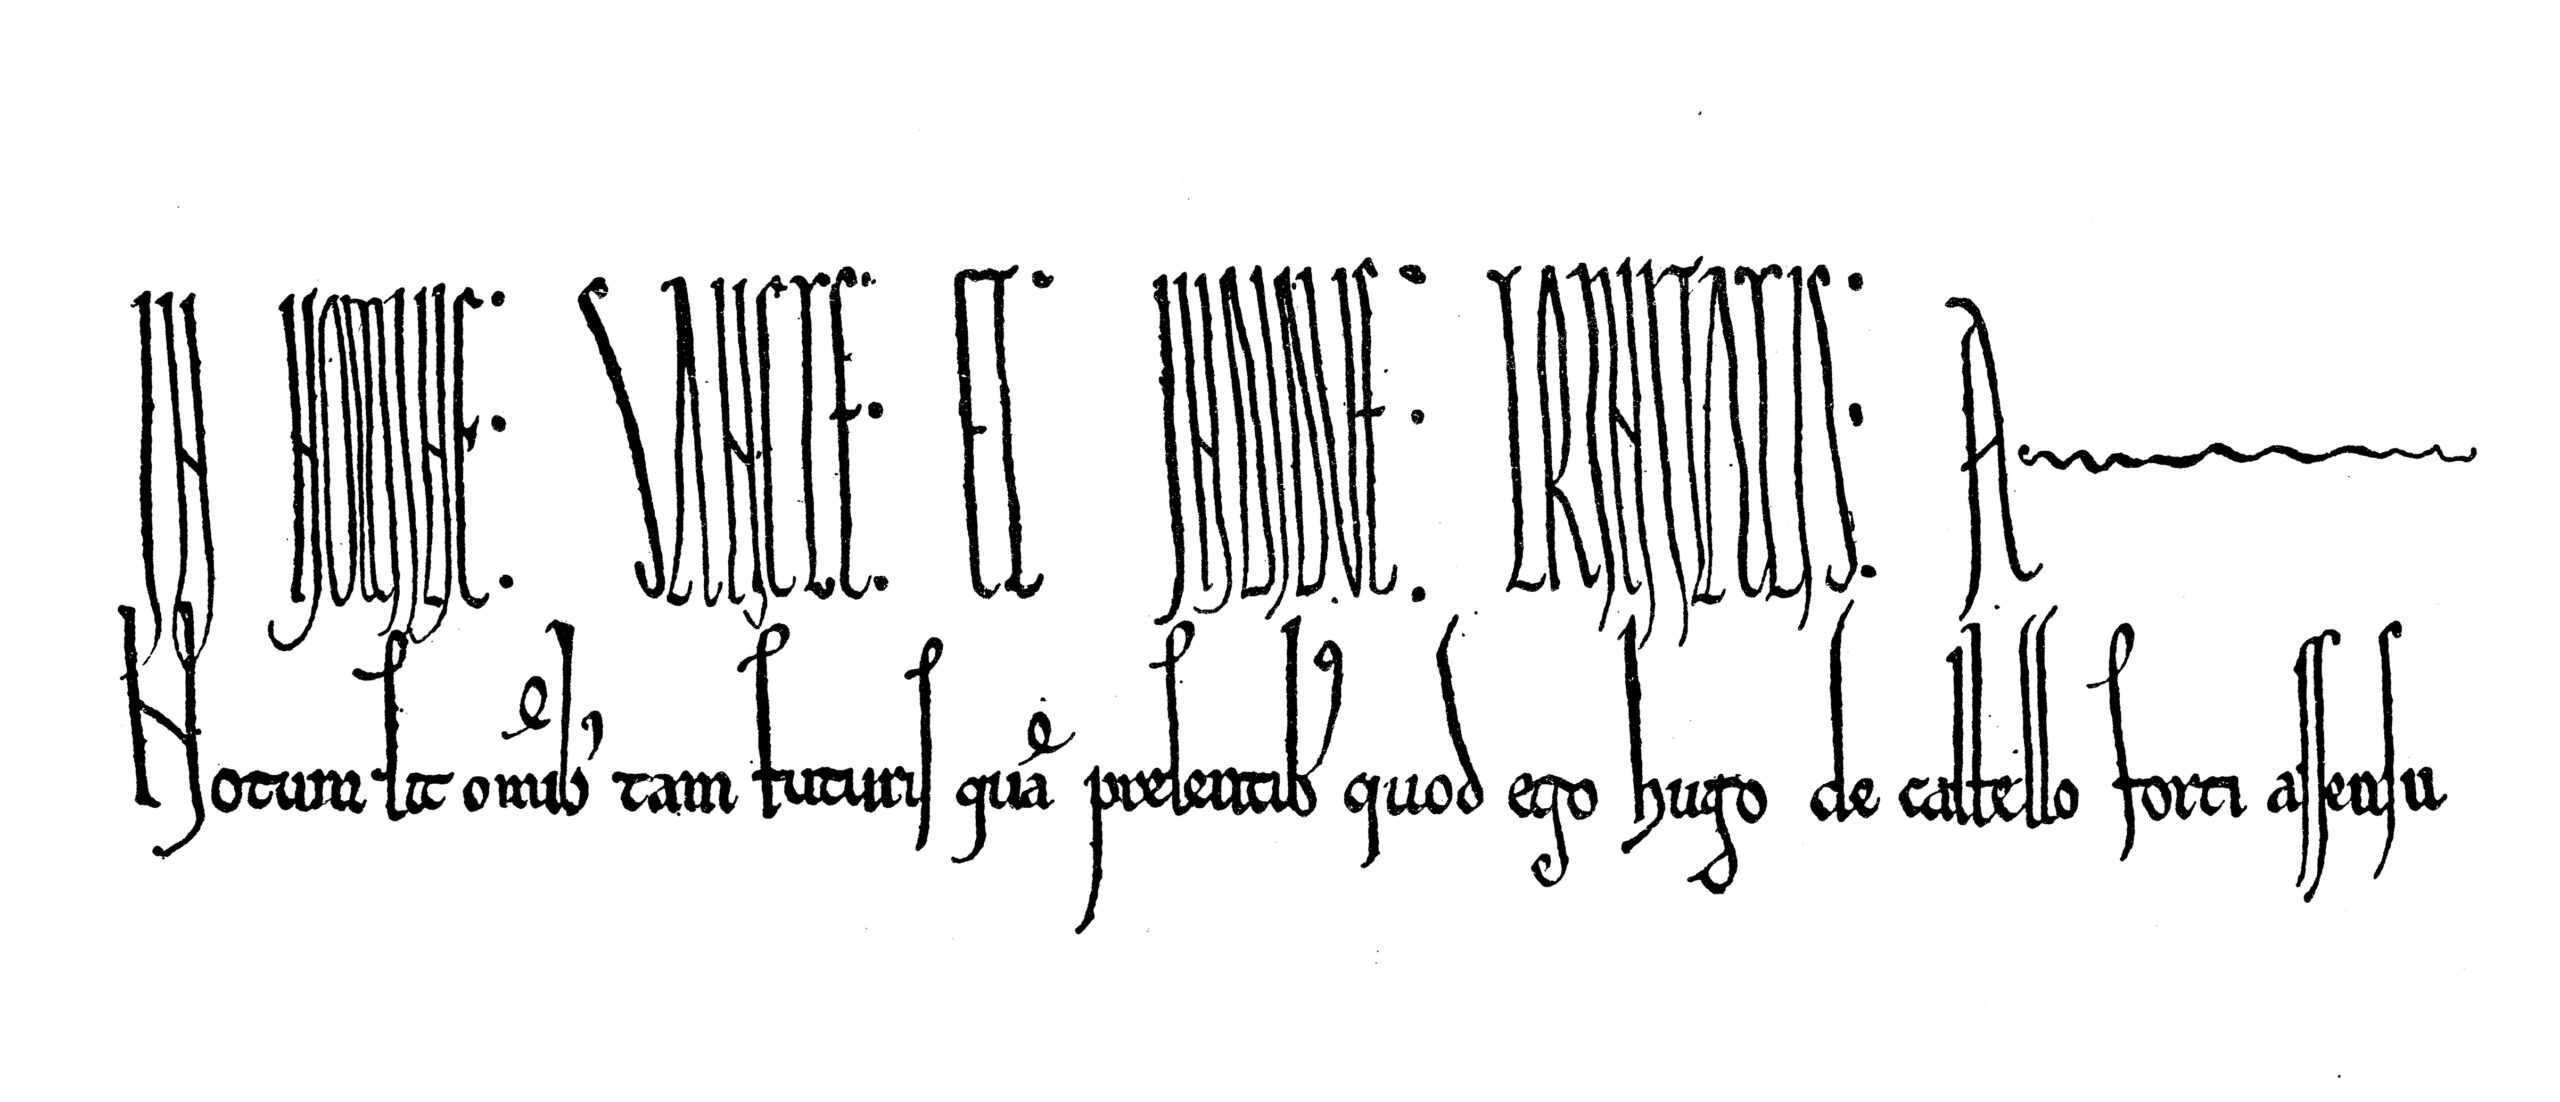 A graphic of a medieval manuscript, indicating how writing has changed over the ages.